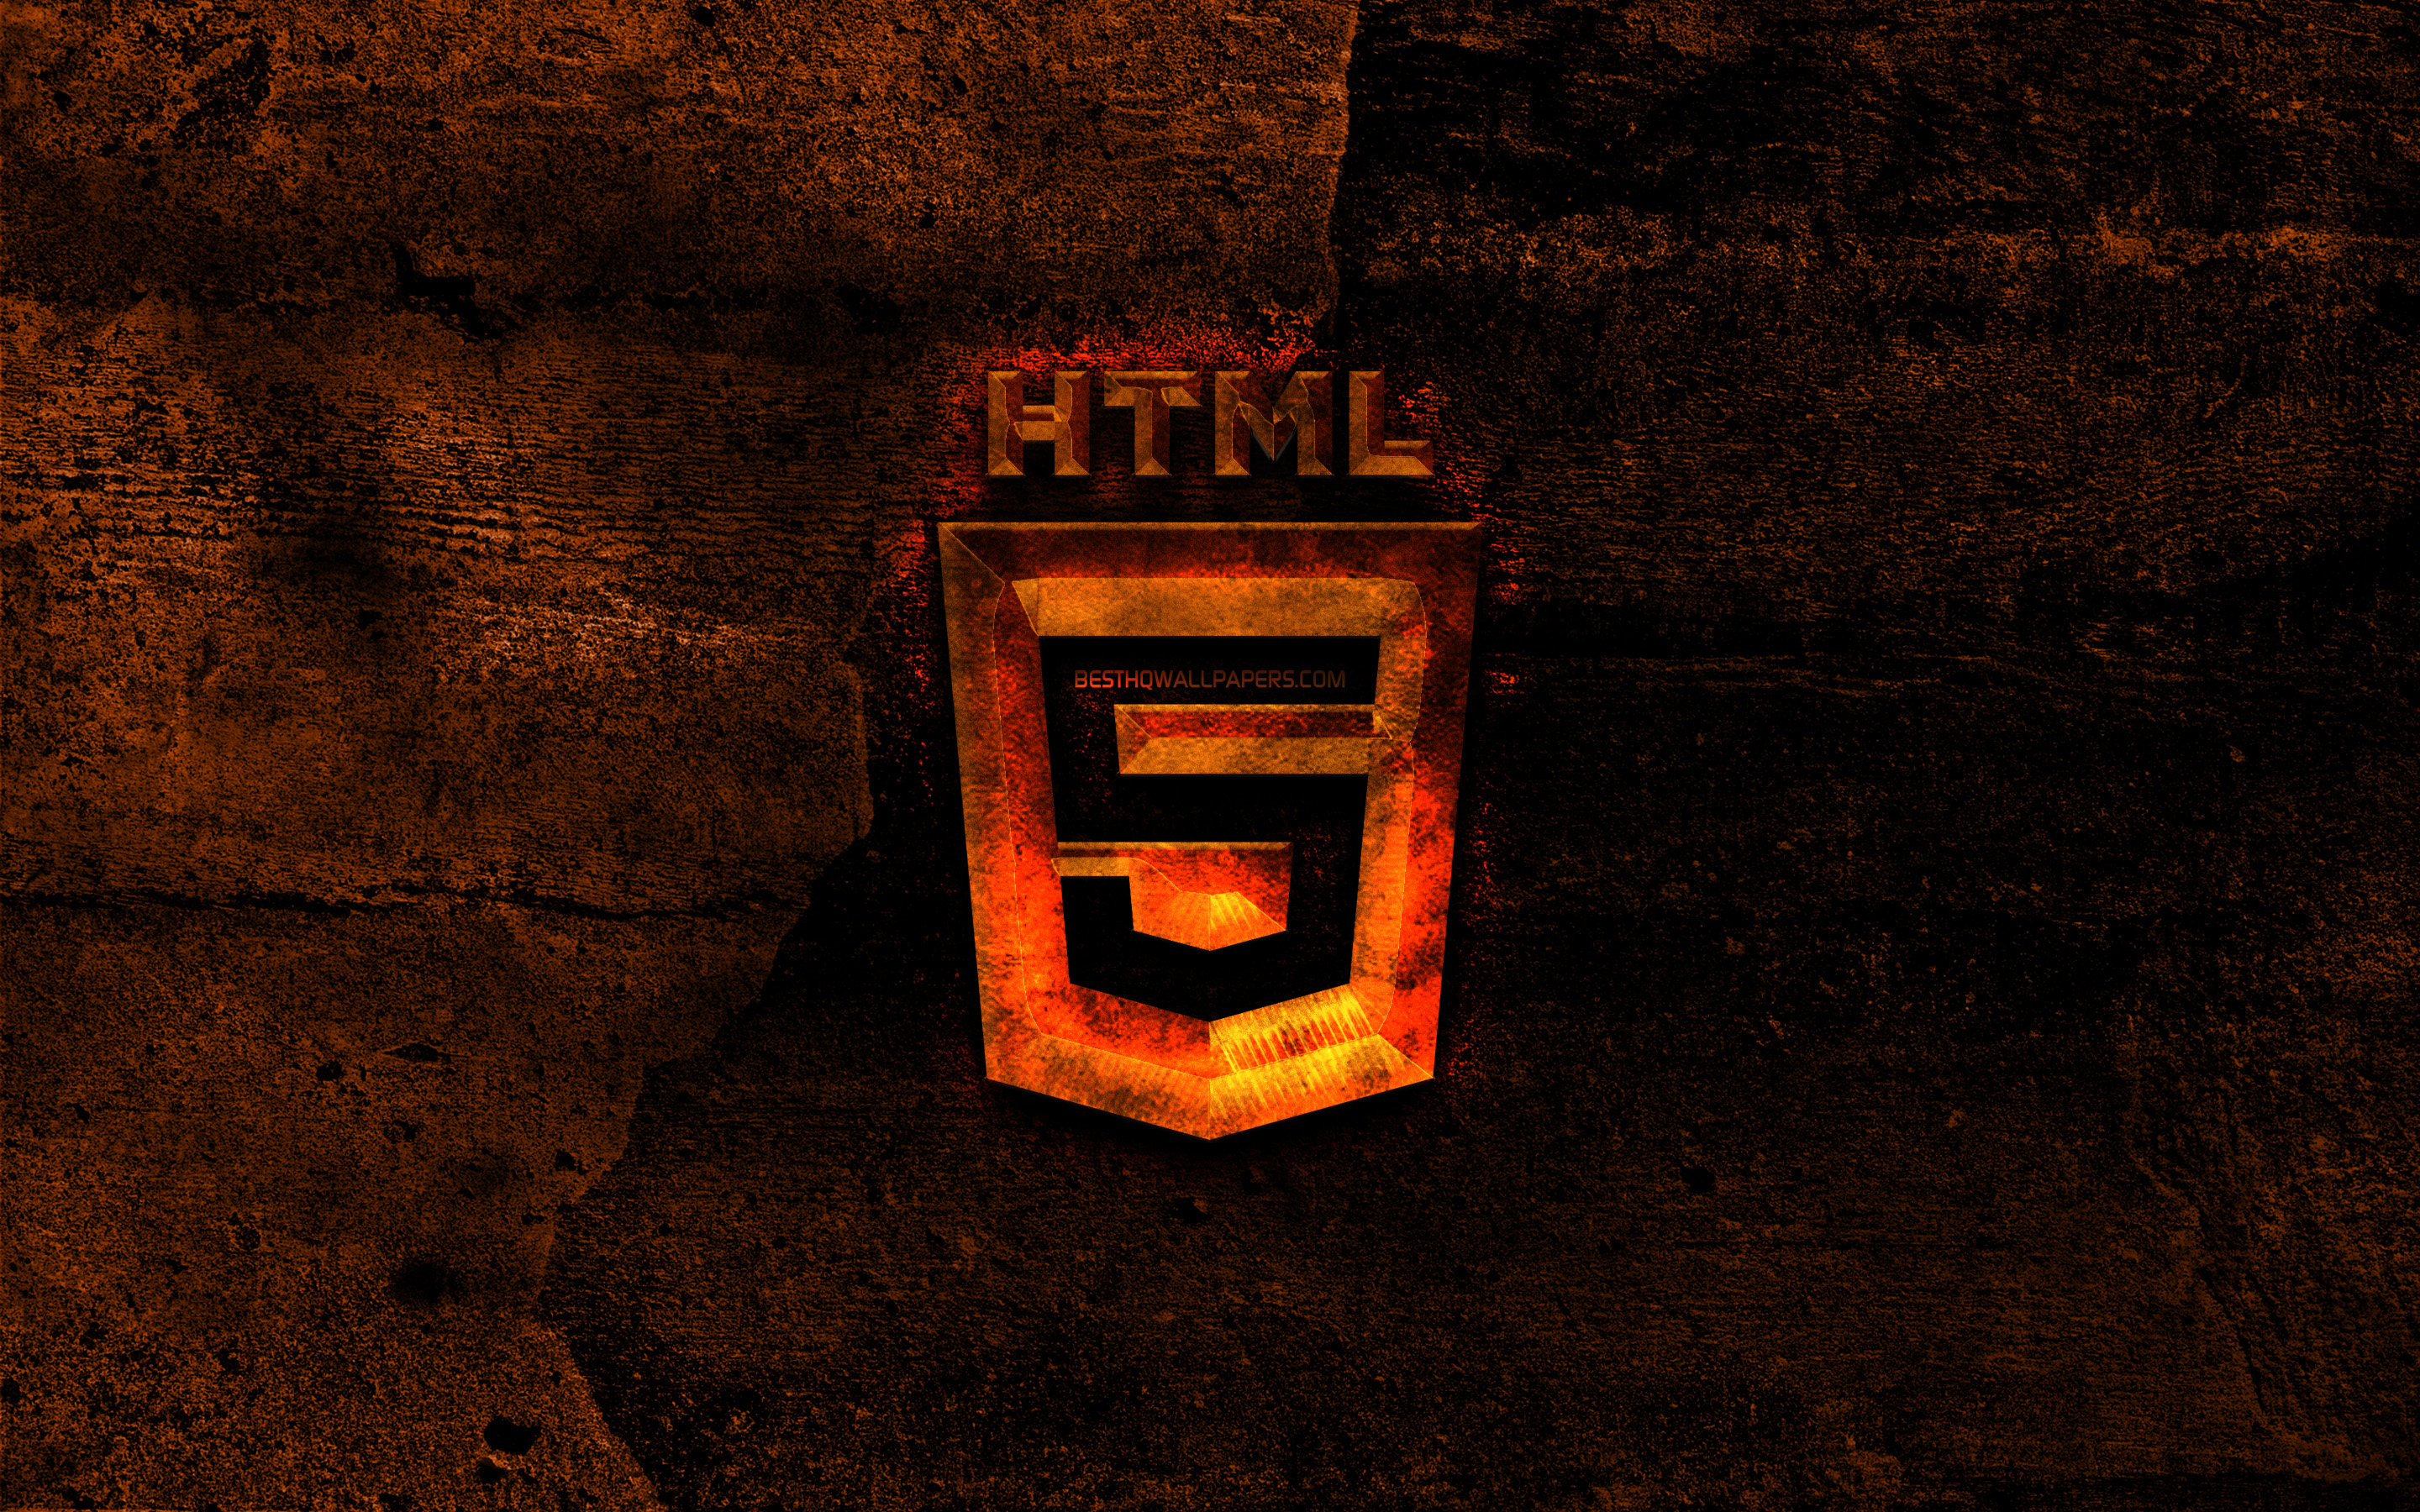 Download wallpaper HTML5 fiery logo, programming language, orange stone background, creative, HTML5 logo, programming language signs, HTML5 for desktop with resolution 2880x1800. High Quality HD picture wallpaper